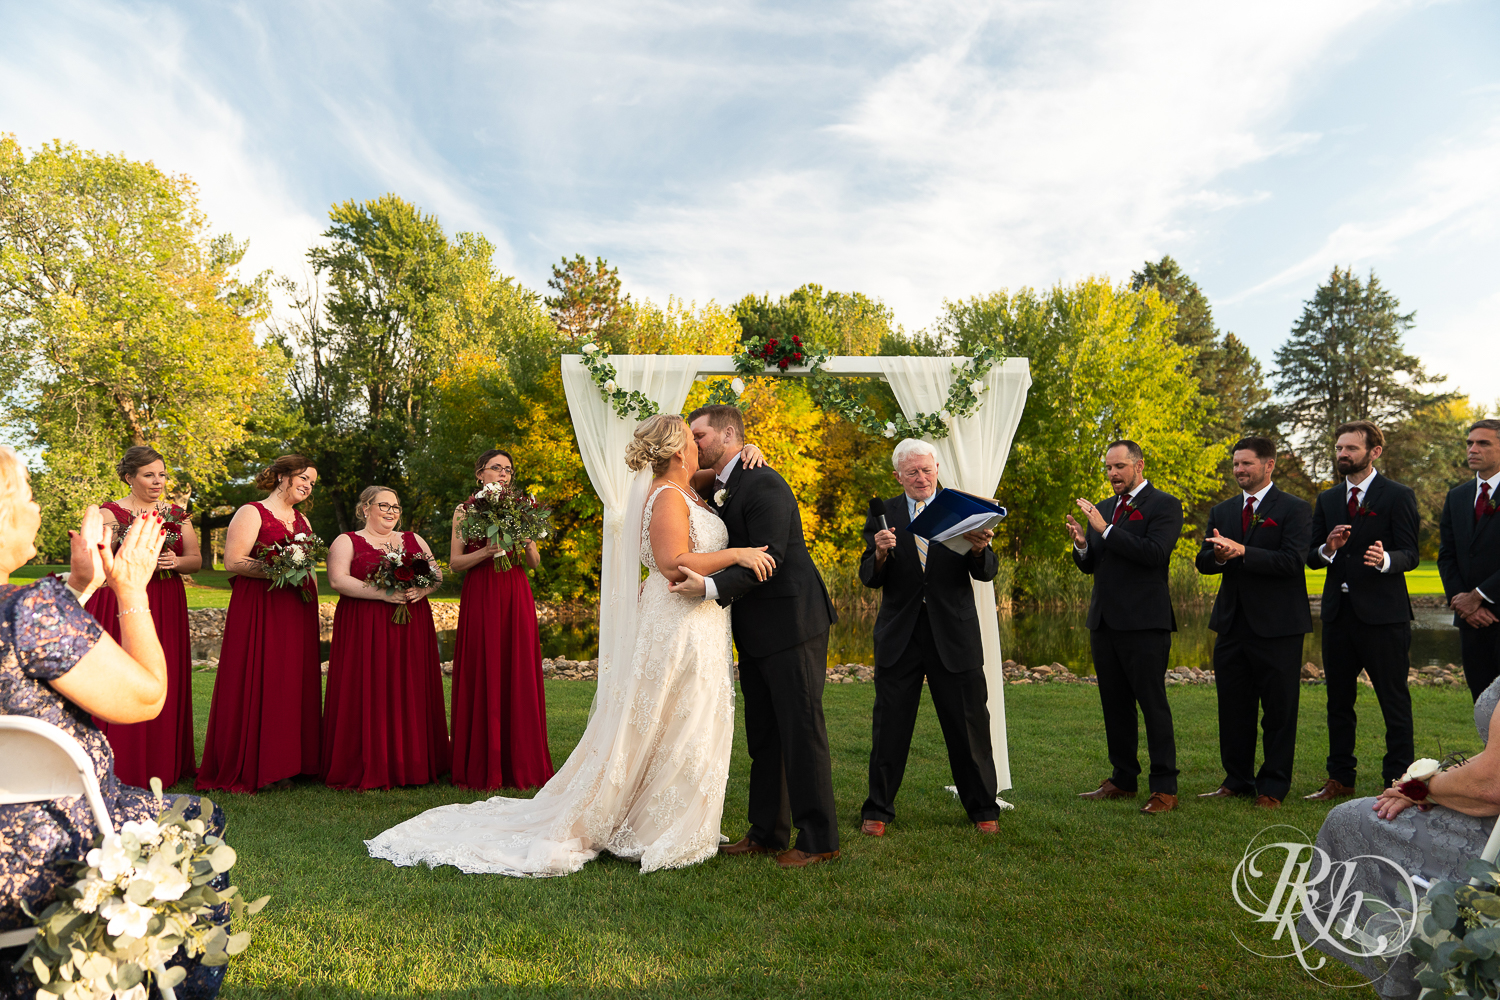 Bride and groom kiss at alter during outdoor wedding ceremony at Hastings Golf Club in Hastings, Minnesota.